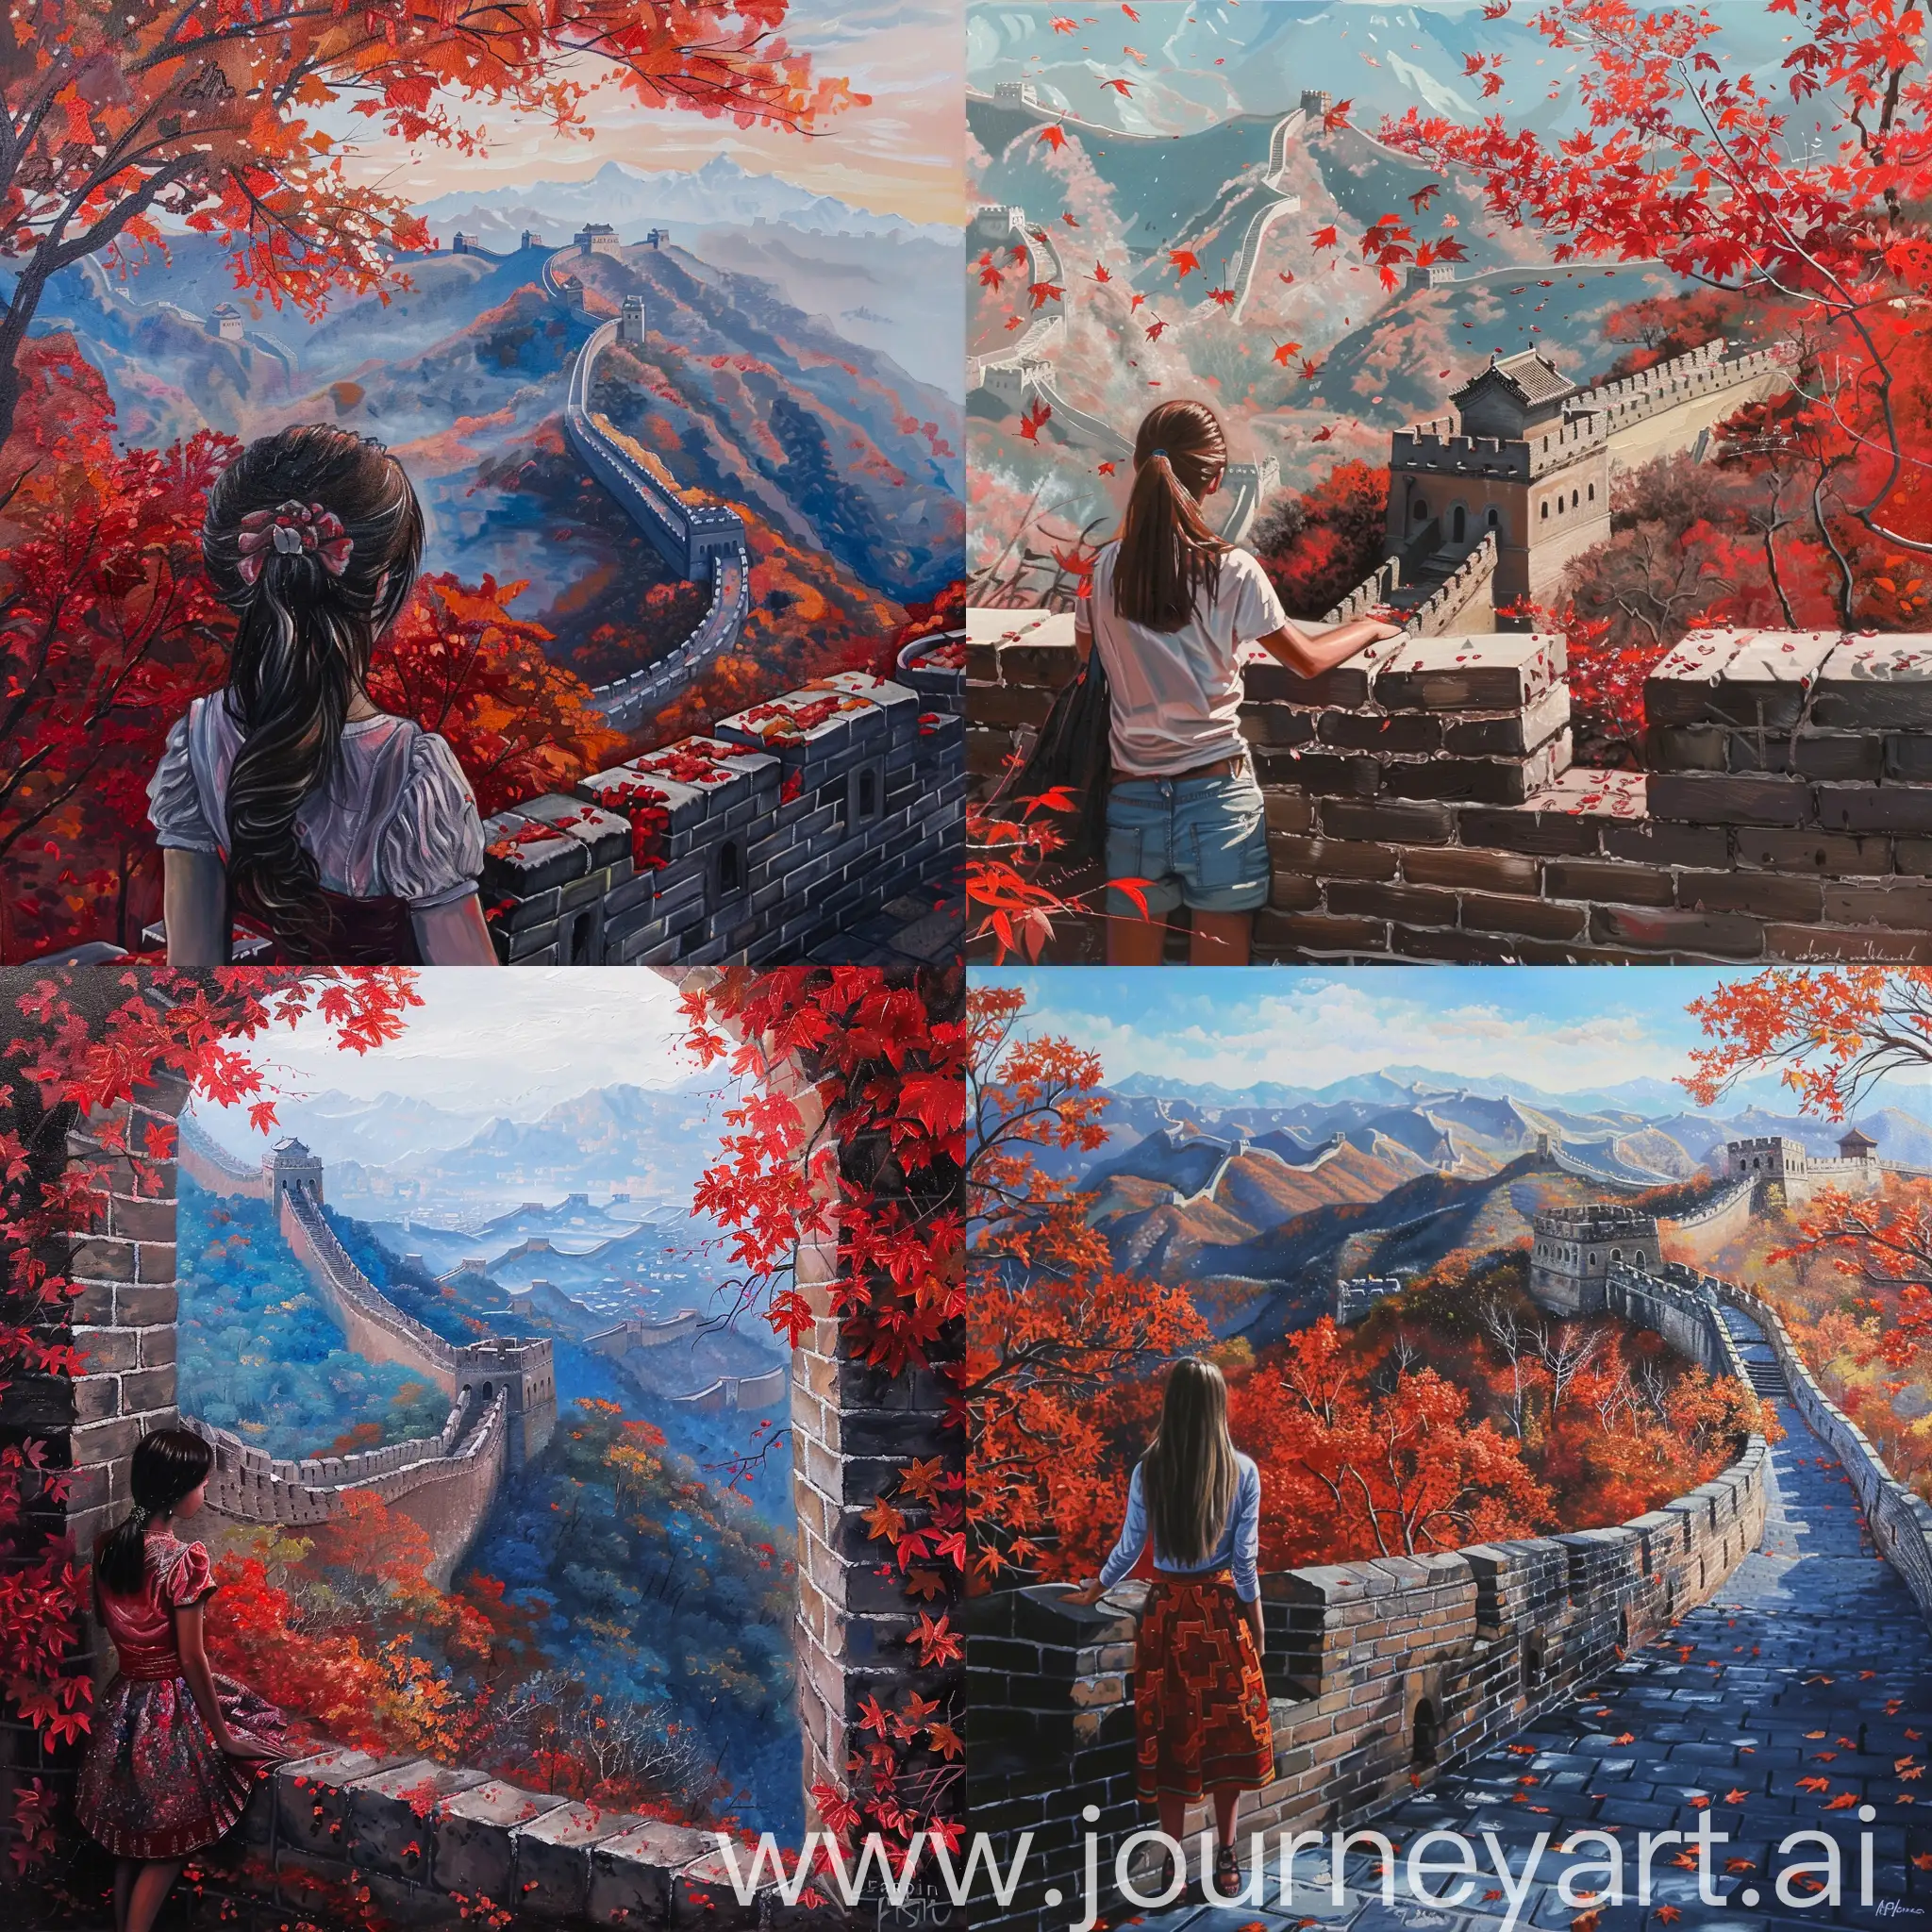 Scenic-Tour-Girl-Exploring-the-Great-Wall-amidst-Fragrant-Hills-Autumn-Red-Leaves